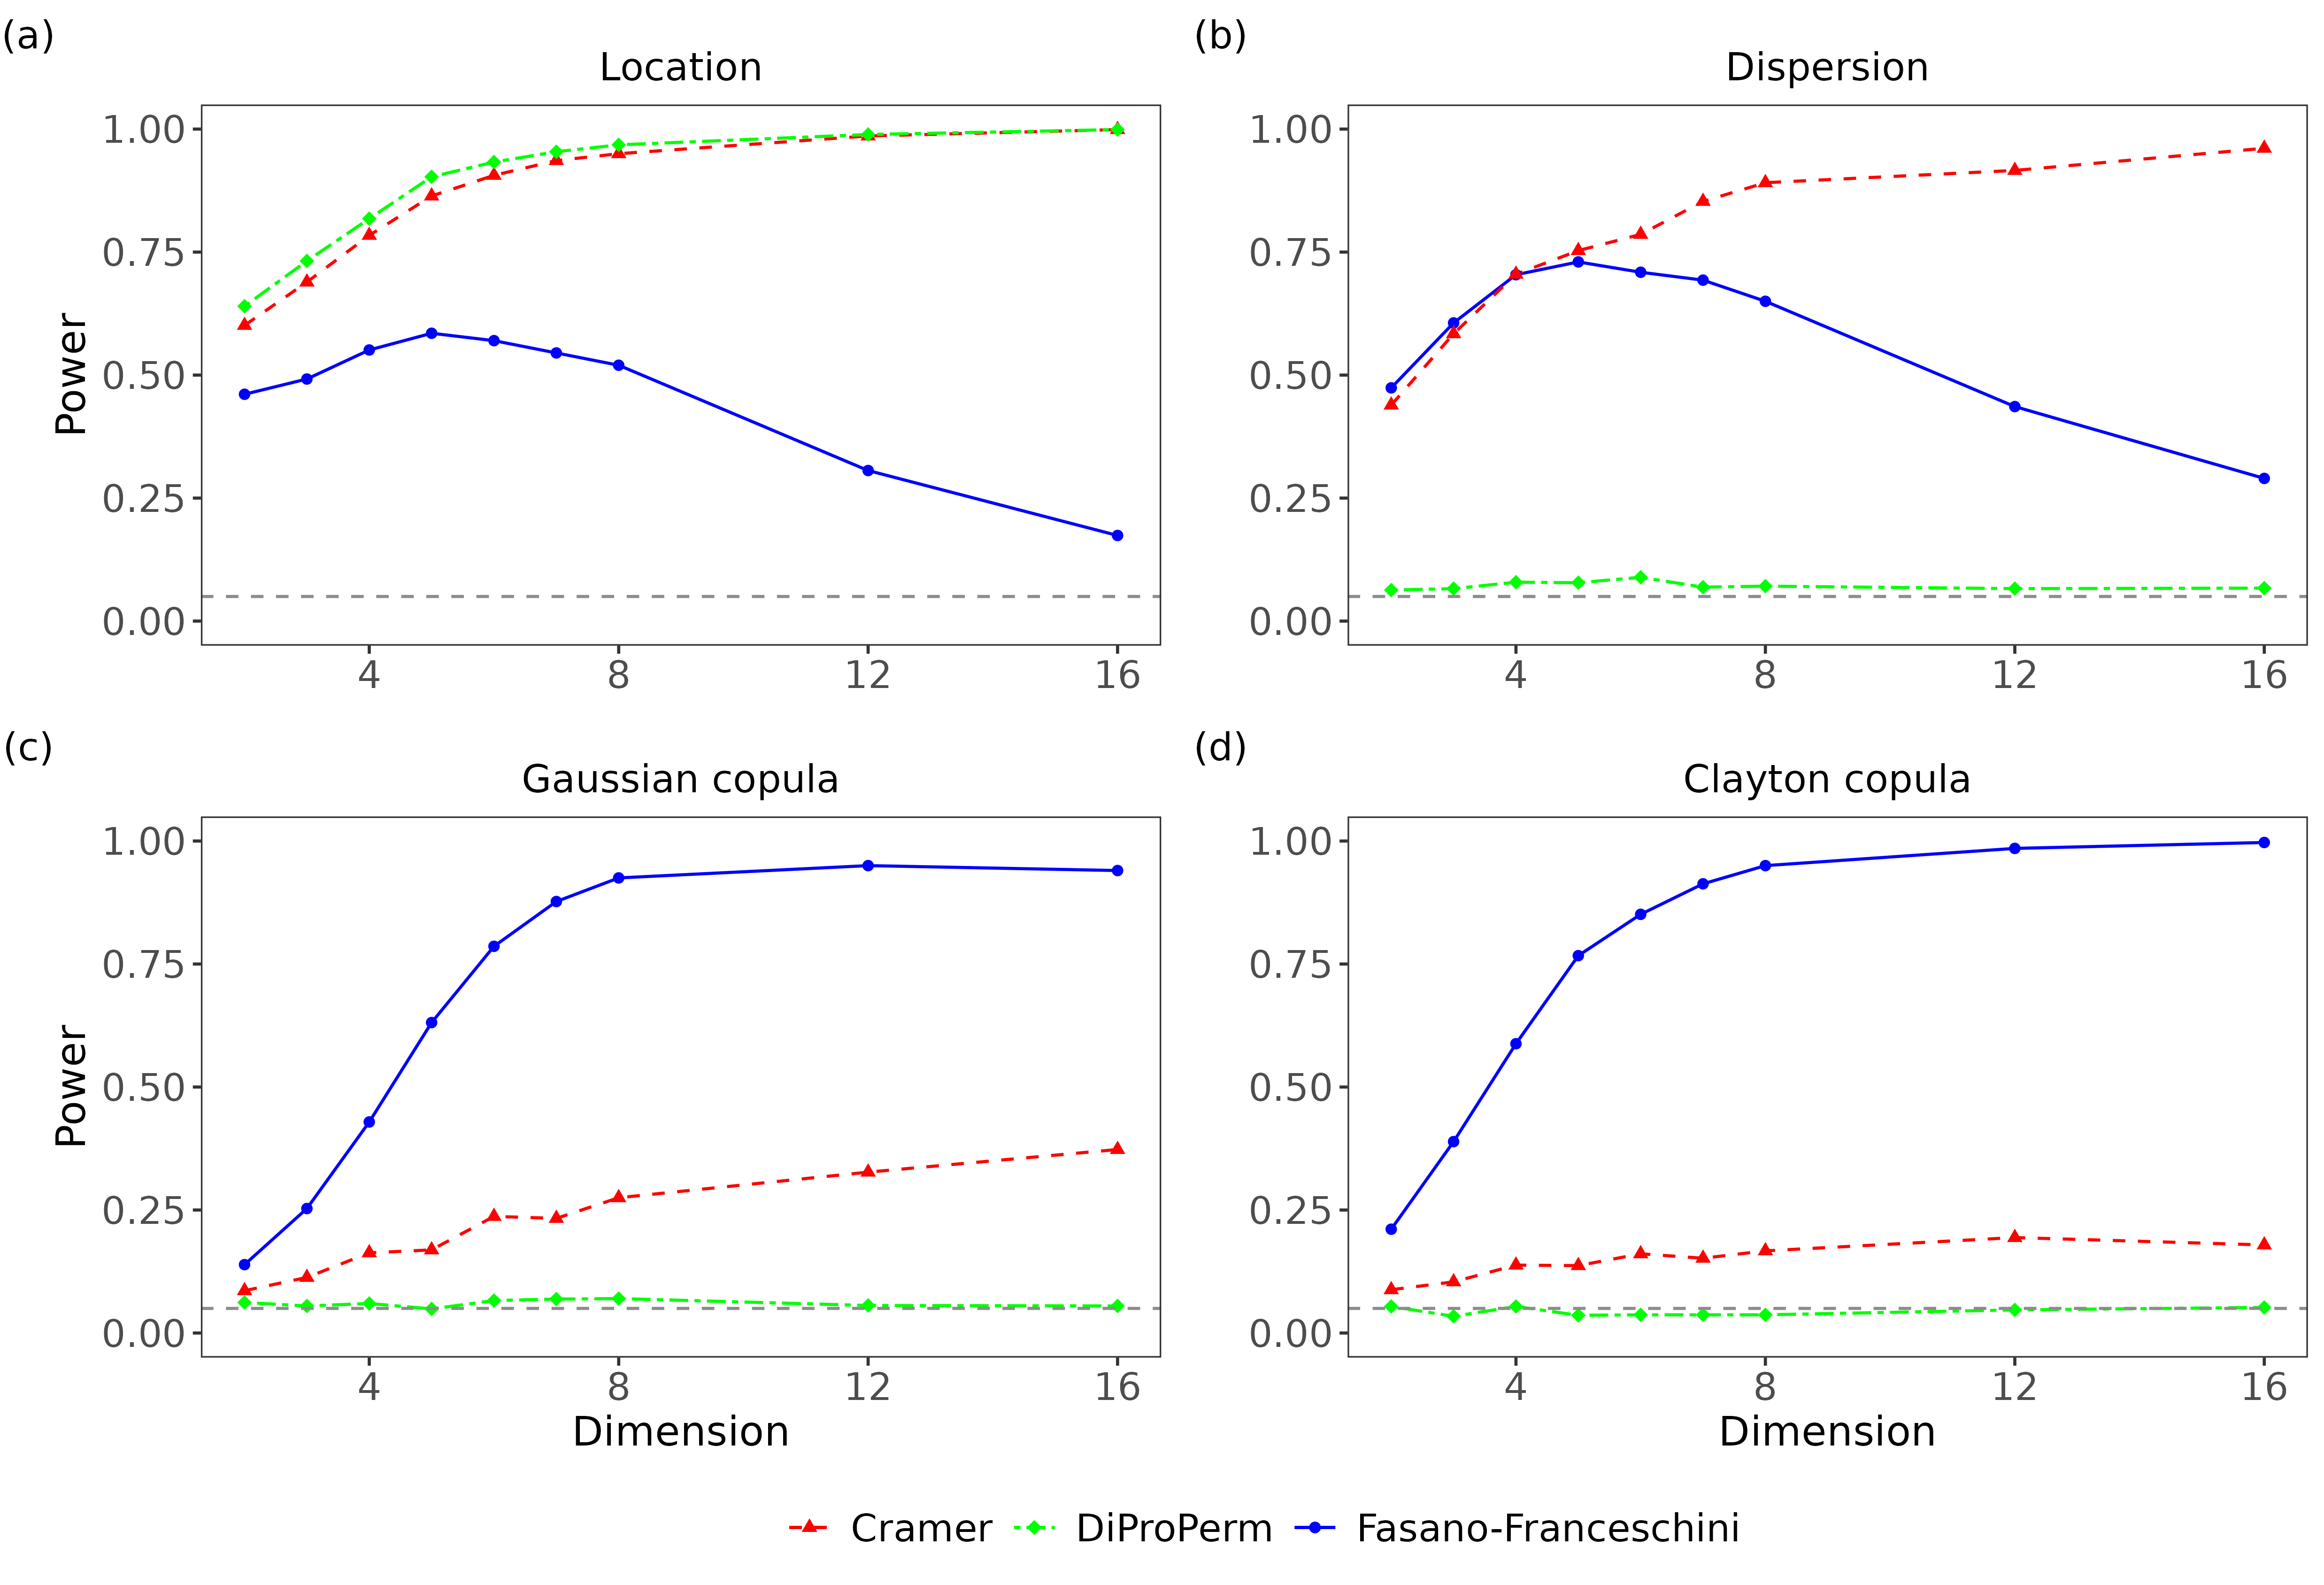 Figure 6: Comparison of power of the Fasano–Franceschini, Cramér, and DiProPerm tests on fixed alternatives as the dimension of the data increases. (a) Location alternative, with S_{1}\sim N_{d}(\mathbf{0},\mathbf{I}_{d}) and S_{2}\sim N_{d}(\mathbf{0.4},\mathbf{I}_{d}). (b) Dispersion alternative, with S_{1}\sim N_{d}(\mathbf{0},\mathbf{I}_{d}) and S_{2}\sim N_{d}(\mathbf{0},\mathbf{I}_{d}+1.5). (c) Gaussian copula alternative, with S_{1}\sim G_{d}(0) and S_{2}\sim G_{d}(0.6). (d) Clayton copula alternative, with S_{1}\sim C_{d}(1) and S_{2}\sim C_{d}(8).